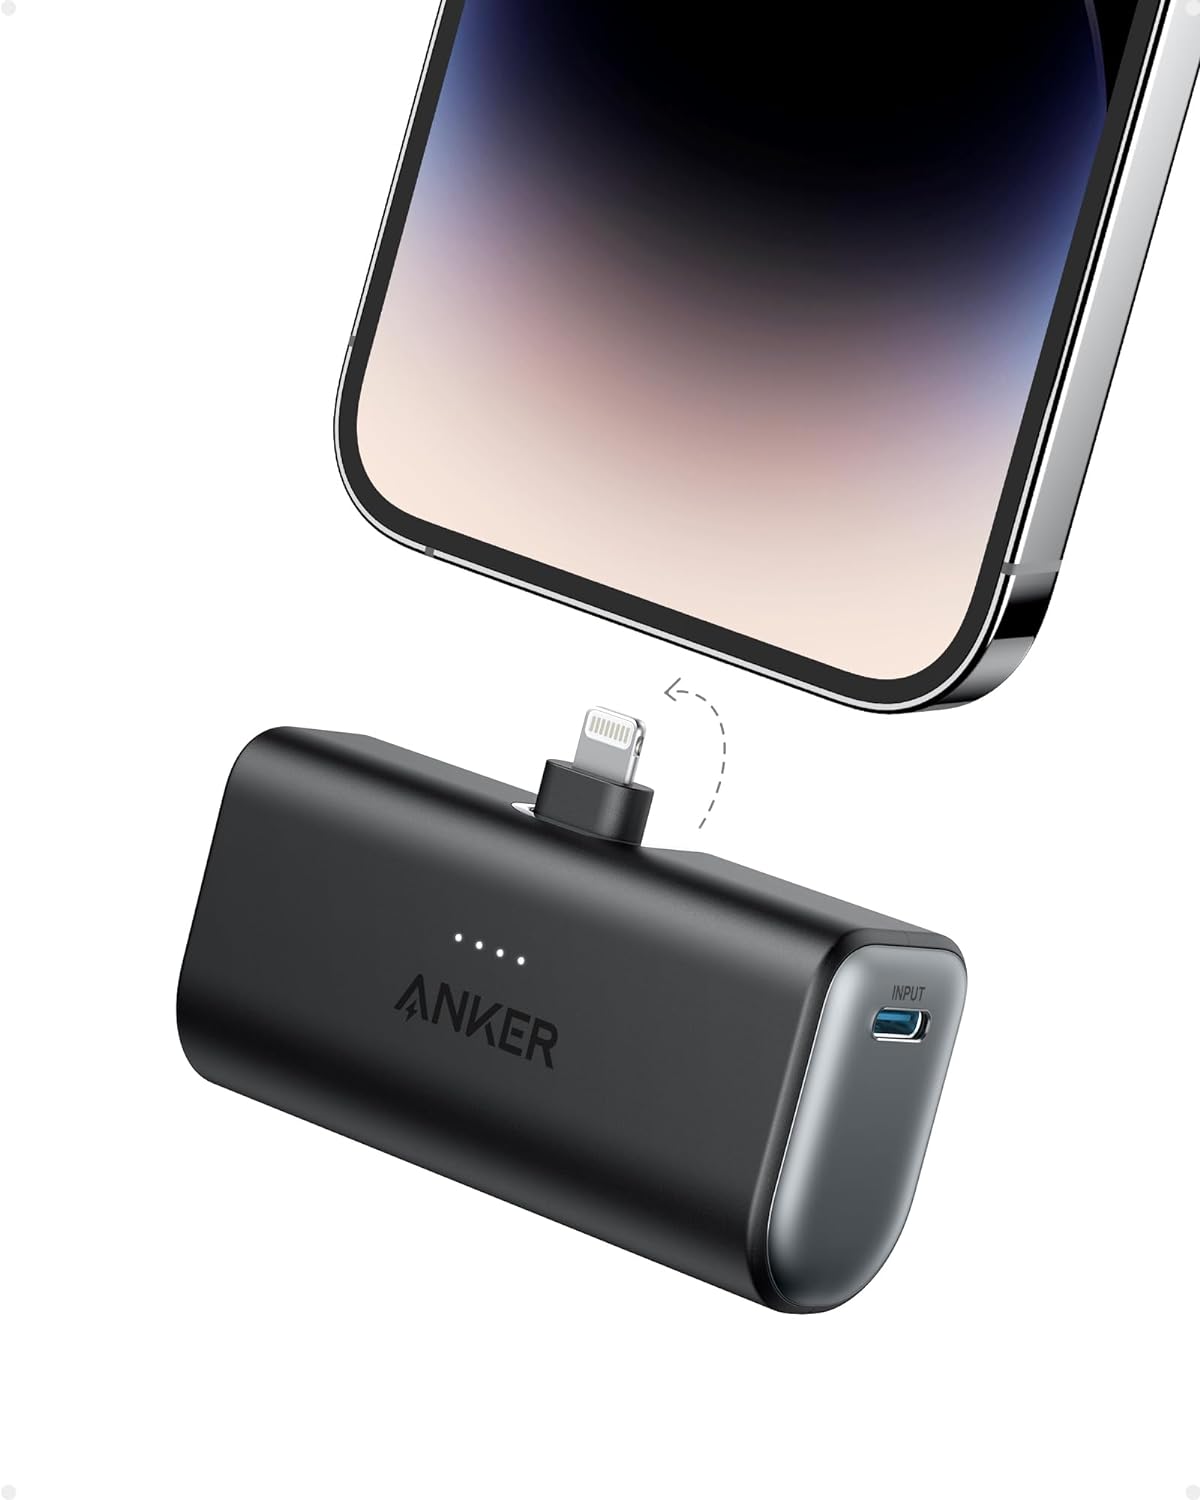 Anker Nano Power Bank with Built-in Lightning Connector, Portable Charger 5,000mAh MFi Certified 12W